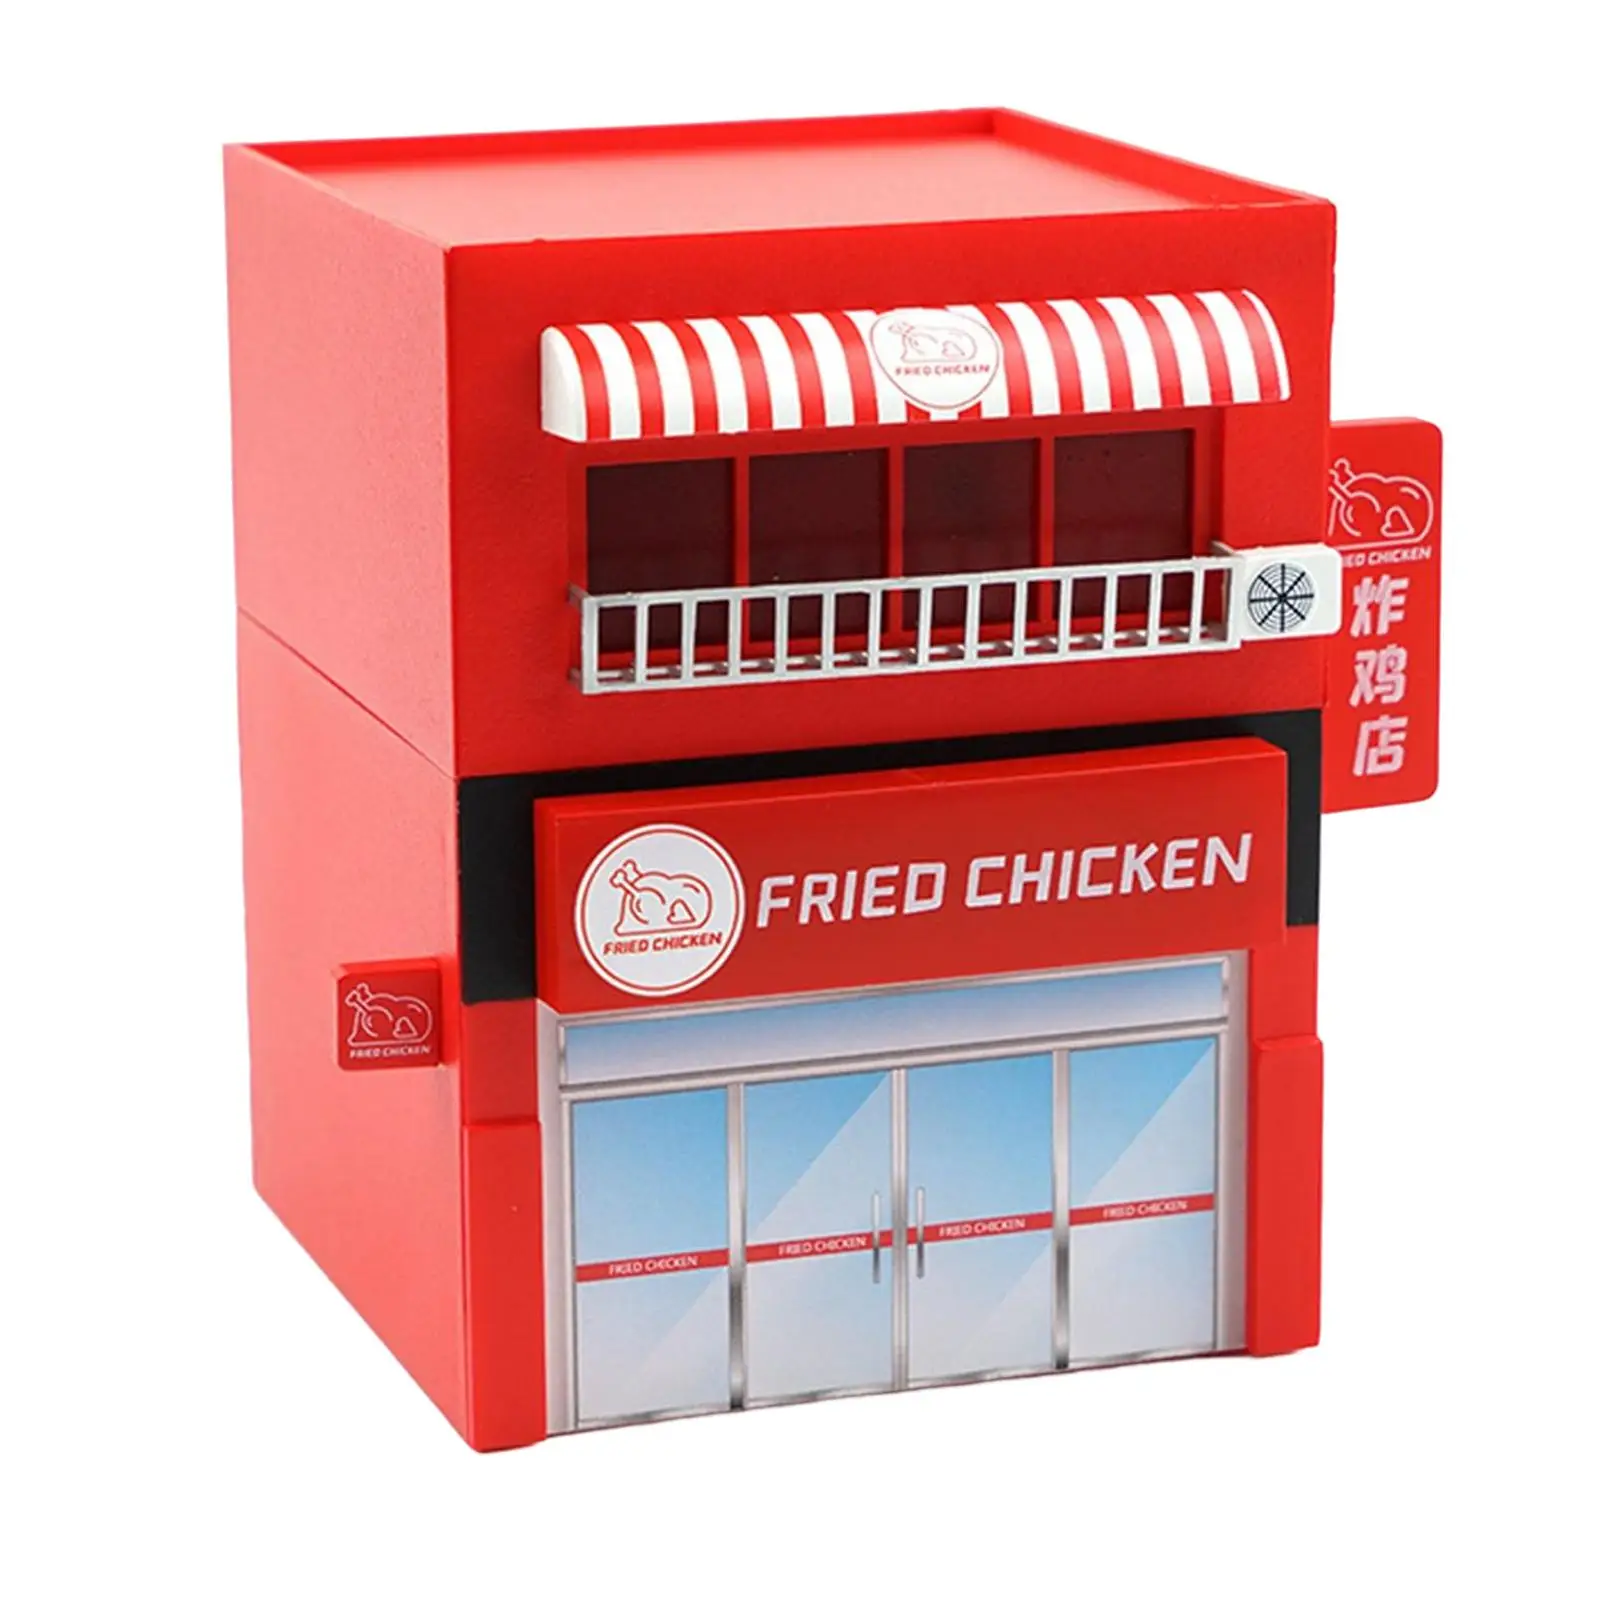 1:64 Scale Fried Shop Diorama Model Desktop Collection Gifts Ornament